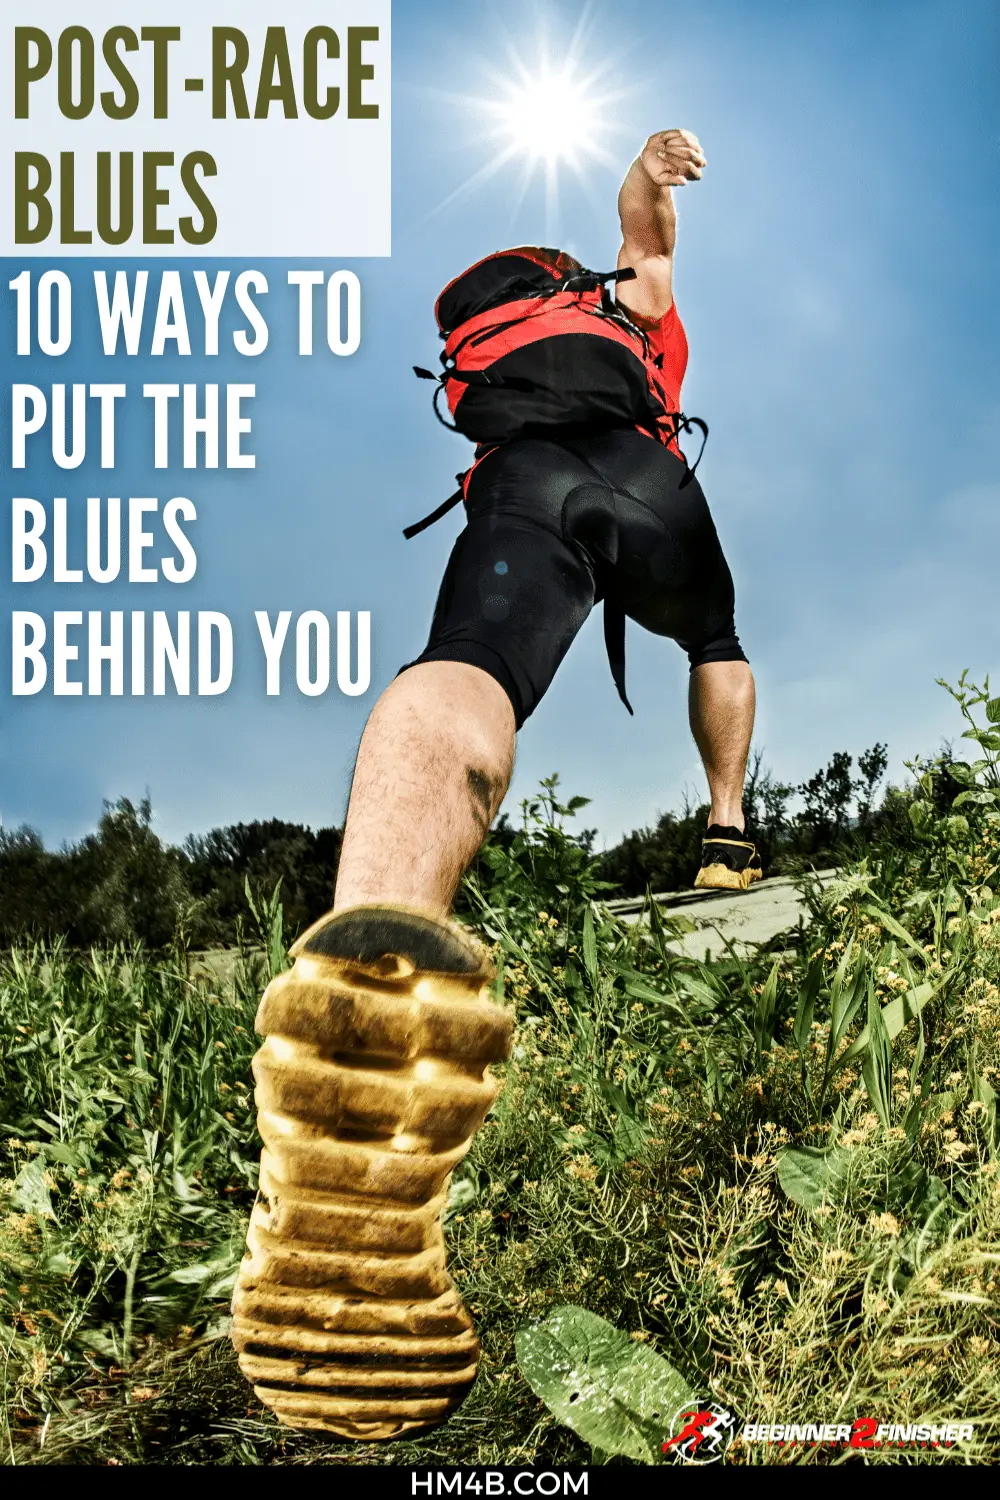 Post-Race Blues - 10 Ways to Put the Blues Behind You